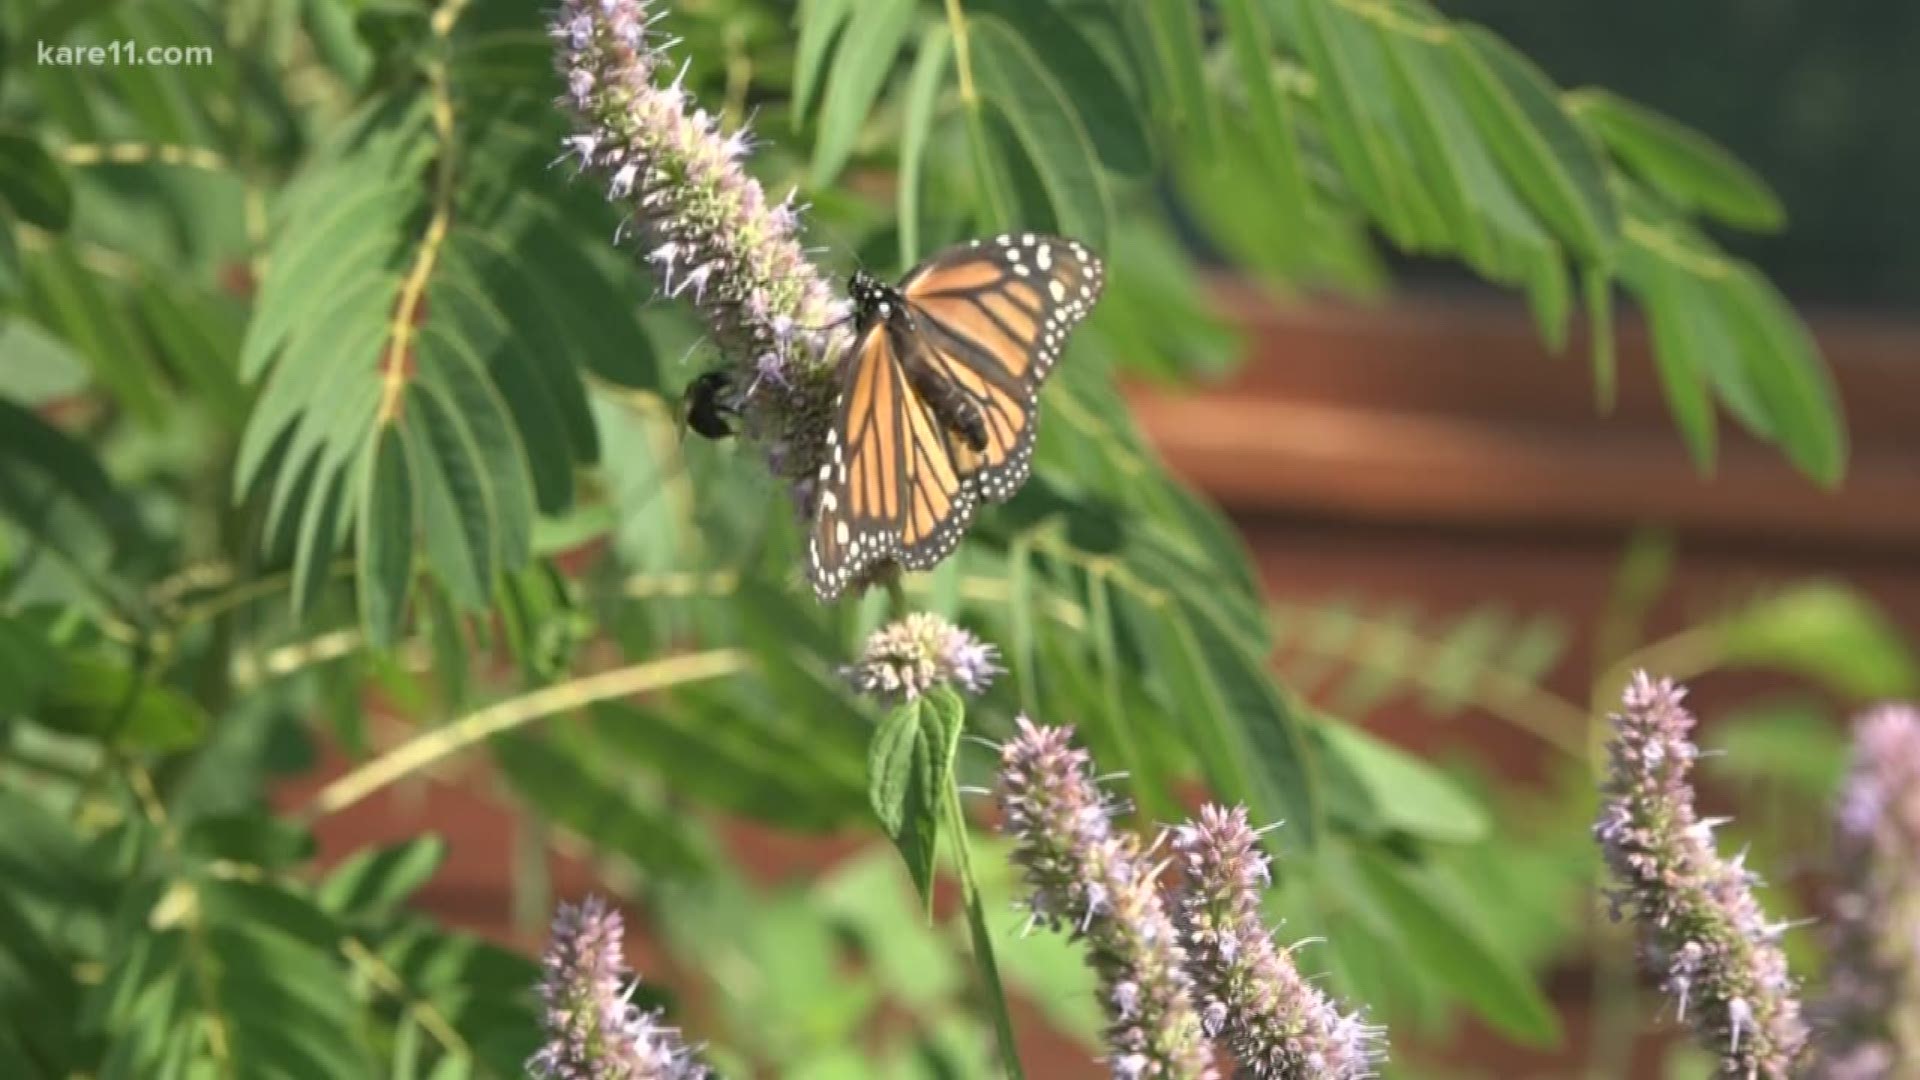 Egg to caterpillar to chrysalis takes about a month before an adult monarch butterfly takes flight. It's this cycle that leads to two peaks in monarch activity every summer. We're in one of those peaks right now. https://kare11.tv/2OYO40n